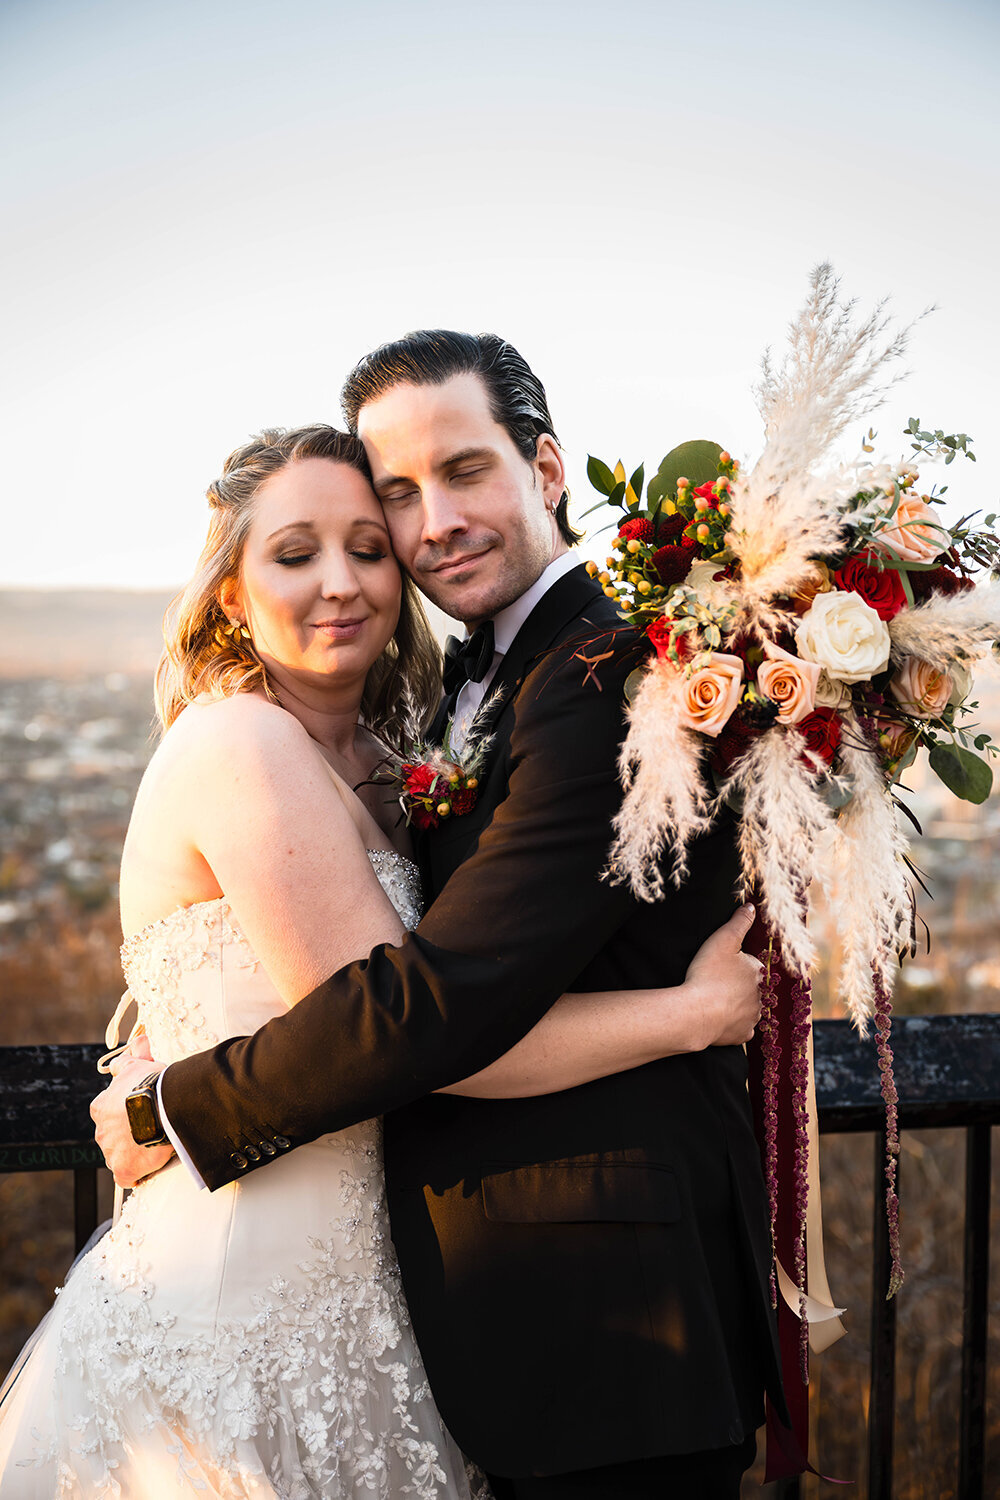 A newlywed couple hold hands at the Rockledge Overlook at sunset, which includes the Blue Ridge Mountains and the cityscape of Downtown Roanoke in the background. The couple look at one another, while the bride holds onto her dress and the groom holds onto the bride’s bouquet.